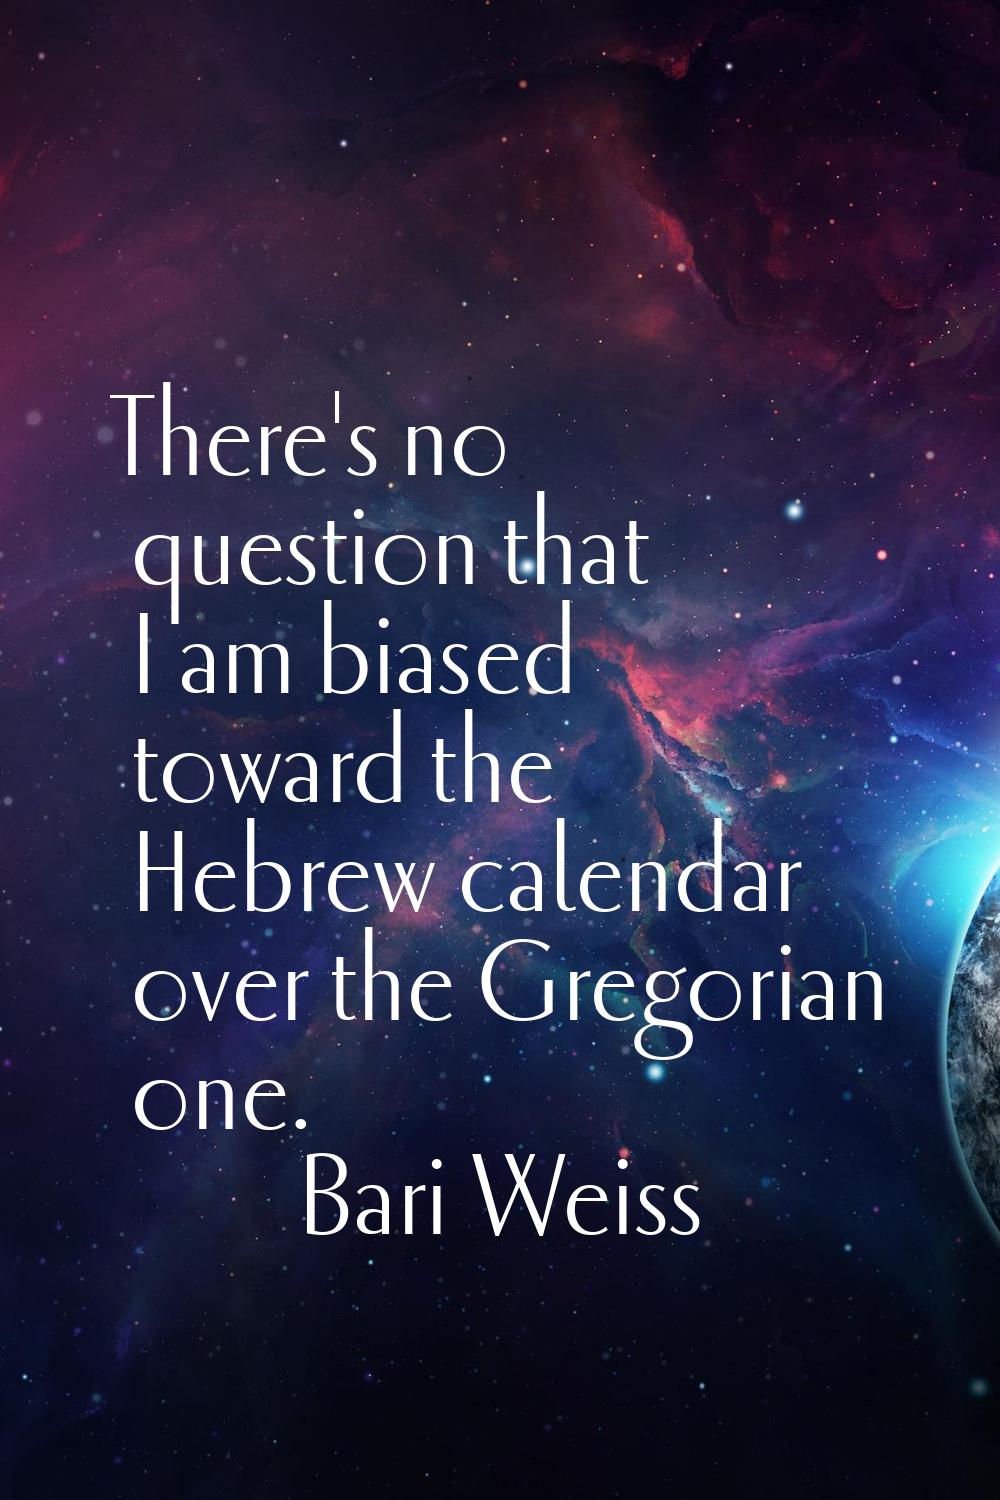 There's no question that I am biased toward the Hebrew calendar over the Gregorian one.